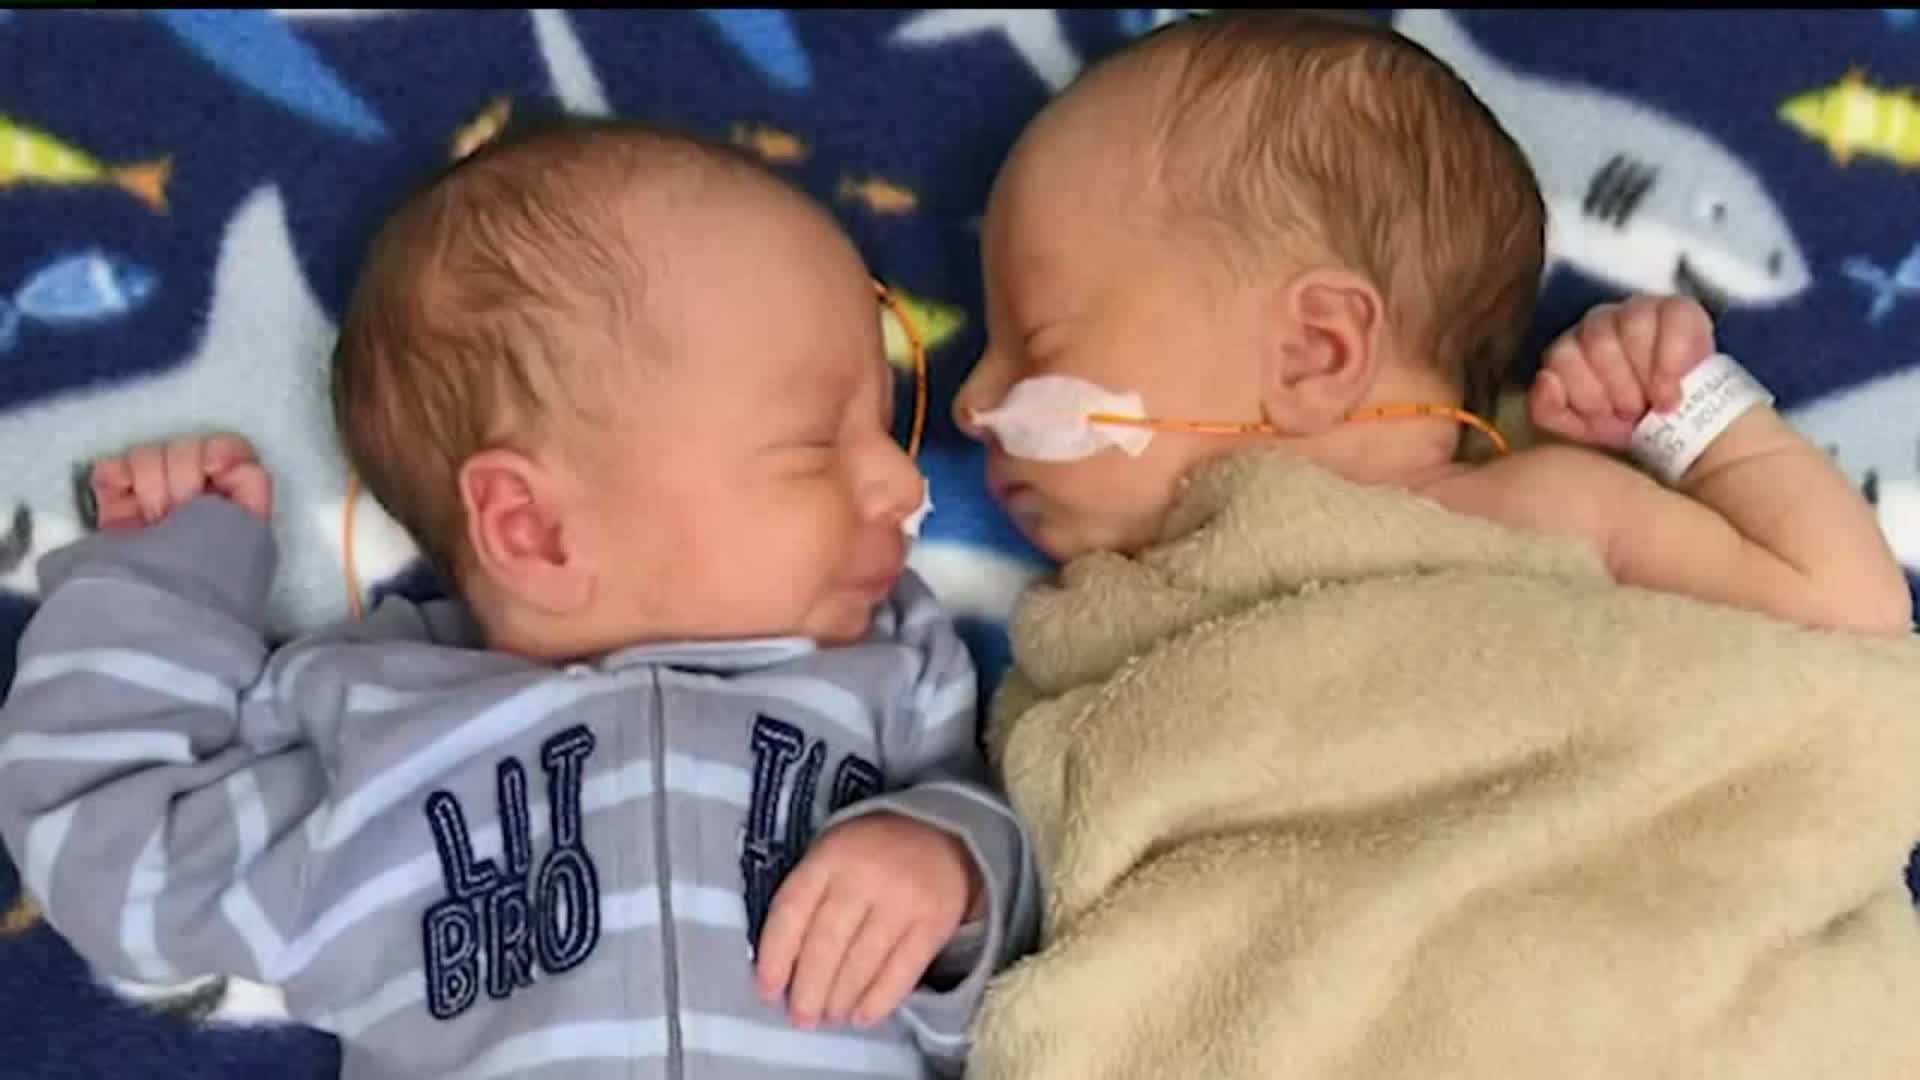 Hospital caring for 12 sets of newborn twins at one time